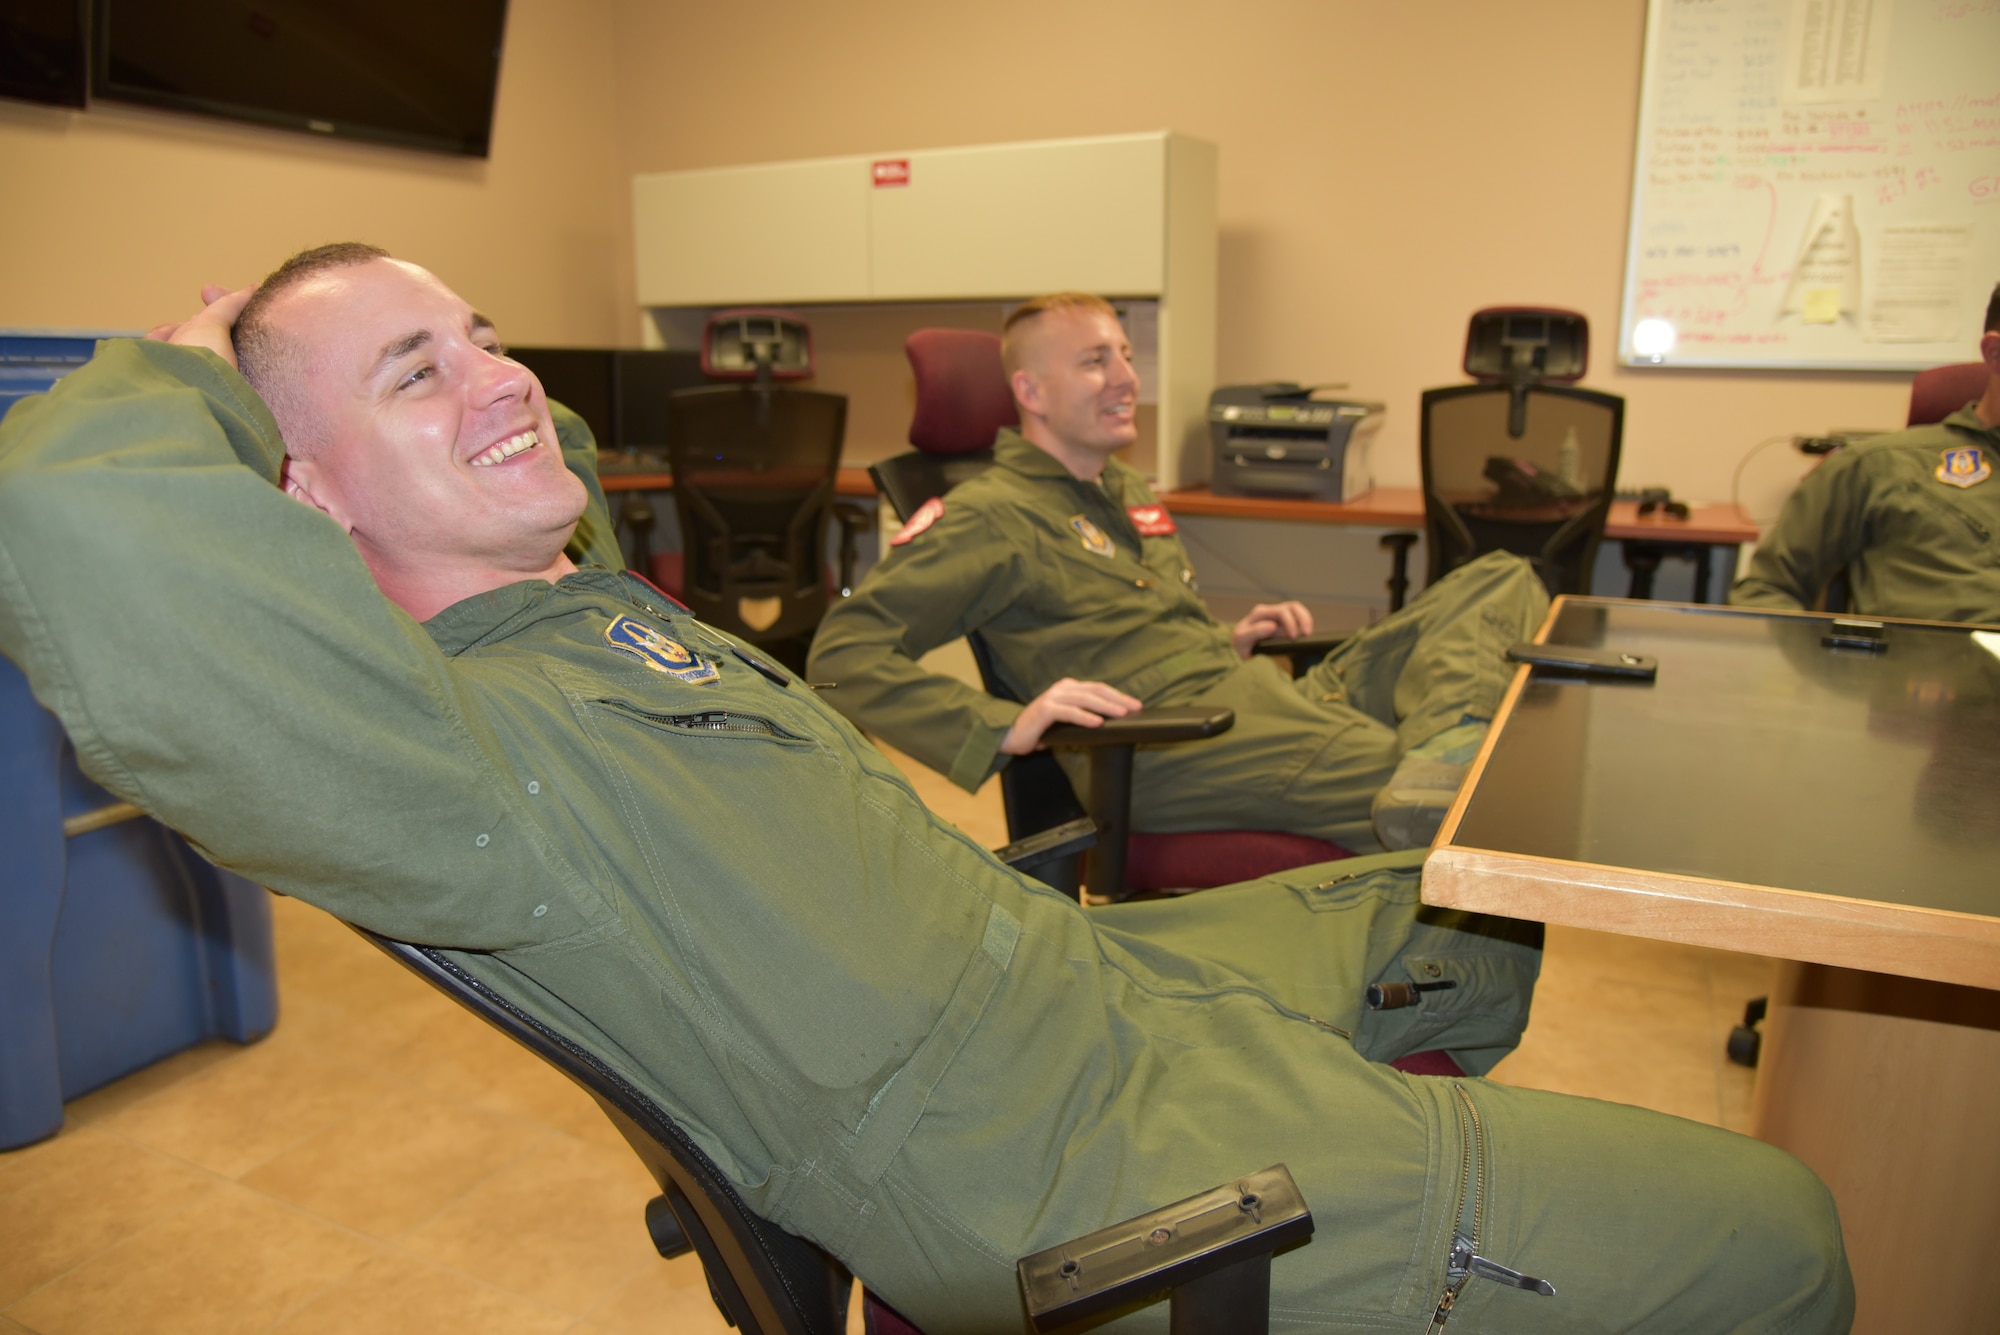 Senior Airman John Boudreaux (left) and Tech Sgt. Joe Helm (right), 815th Airlift Squadron loadmasters, relax after their training mission was completed during a post flight briefing, April 18, 2019, Keesler Air Force Base, Mississippi. Boudreaux suffered three fractured vertebra in a car wreck. After receiving surgery and completing physical therapy, he attended loadmaster school for a second time and is in the process of completing his training to become a fully qualified loadmaster.  (U.S. Air Force photo by Tech Sgt. Michael Farrar)